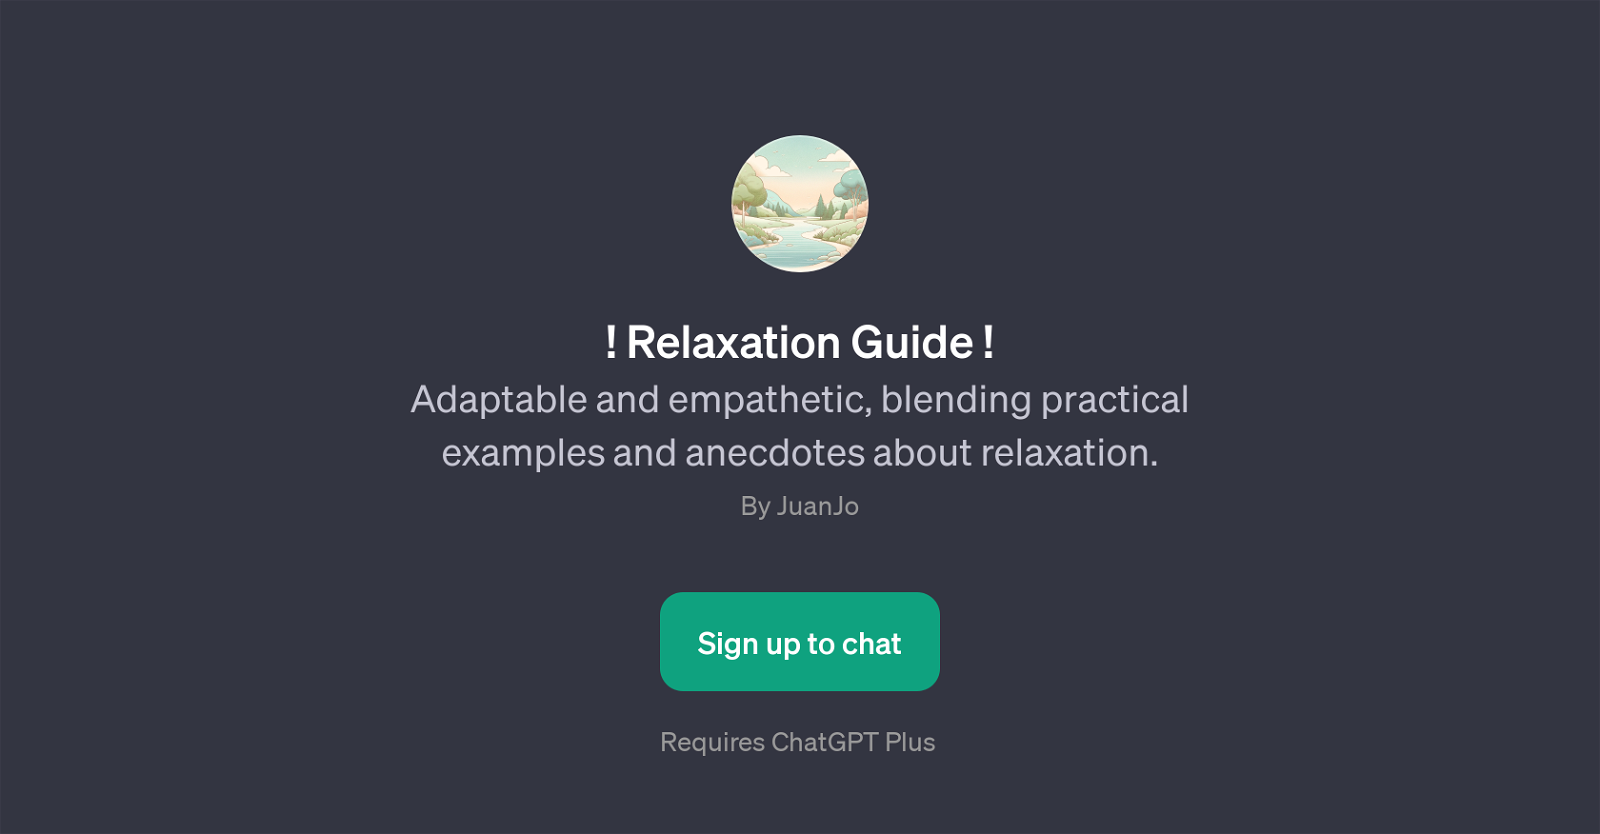 Relaxation Guide website